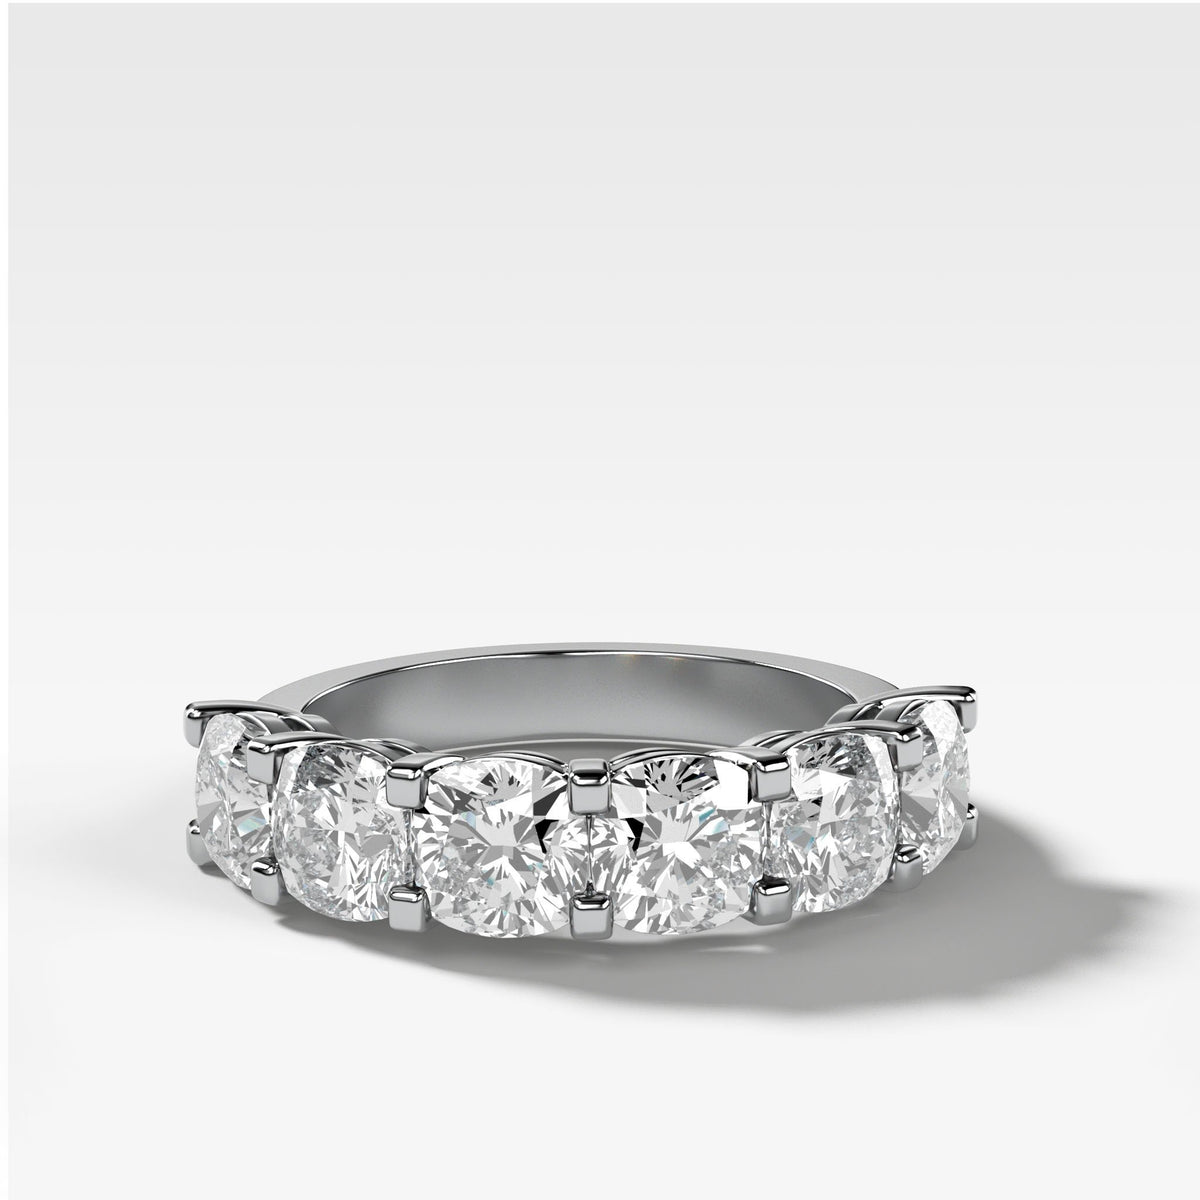 Six Stone Shared Prong Diamond Band With Cushion Cuts by Good Stone in White Gold